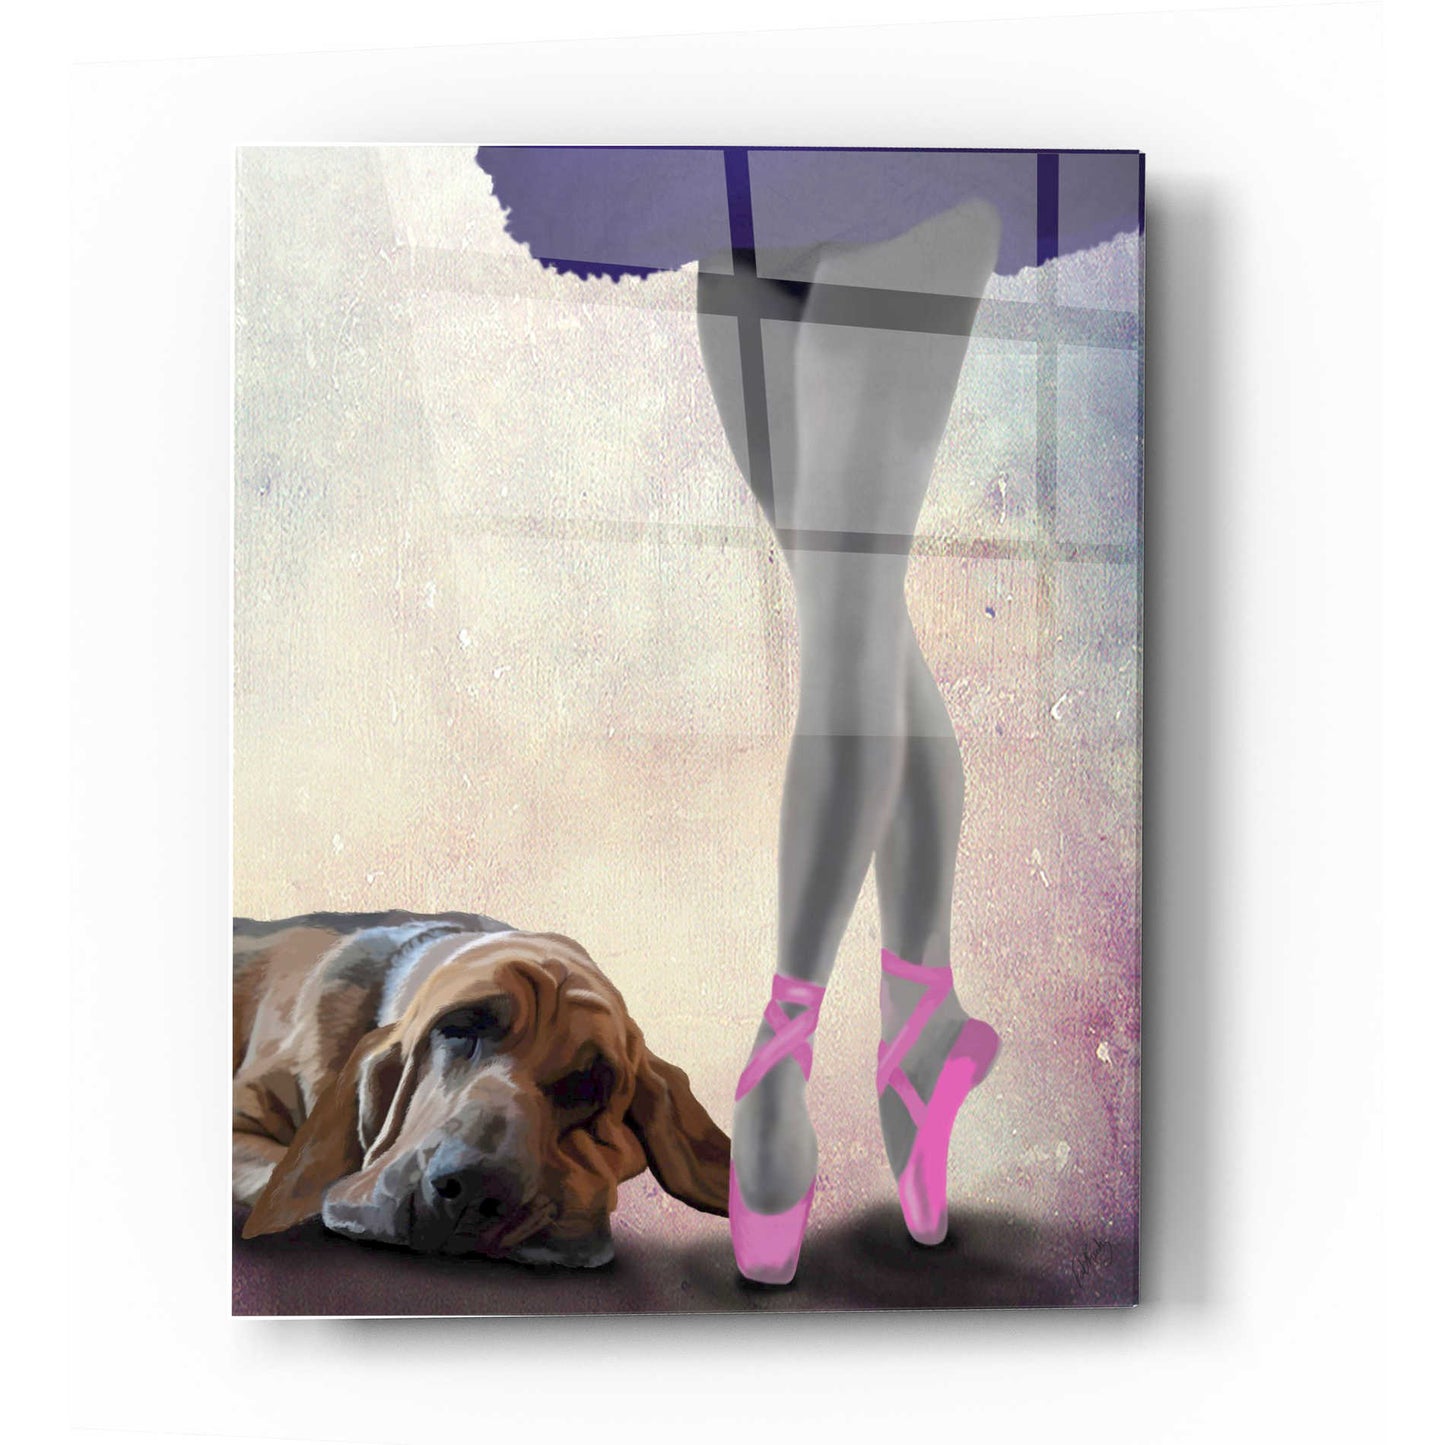 Epic Art 'Bloodhound And Ballet Dancer' by Fab Funky Acrylic Glass Wall Art,12x16